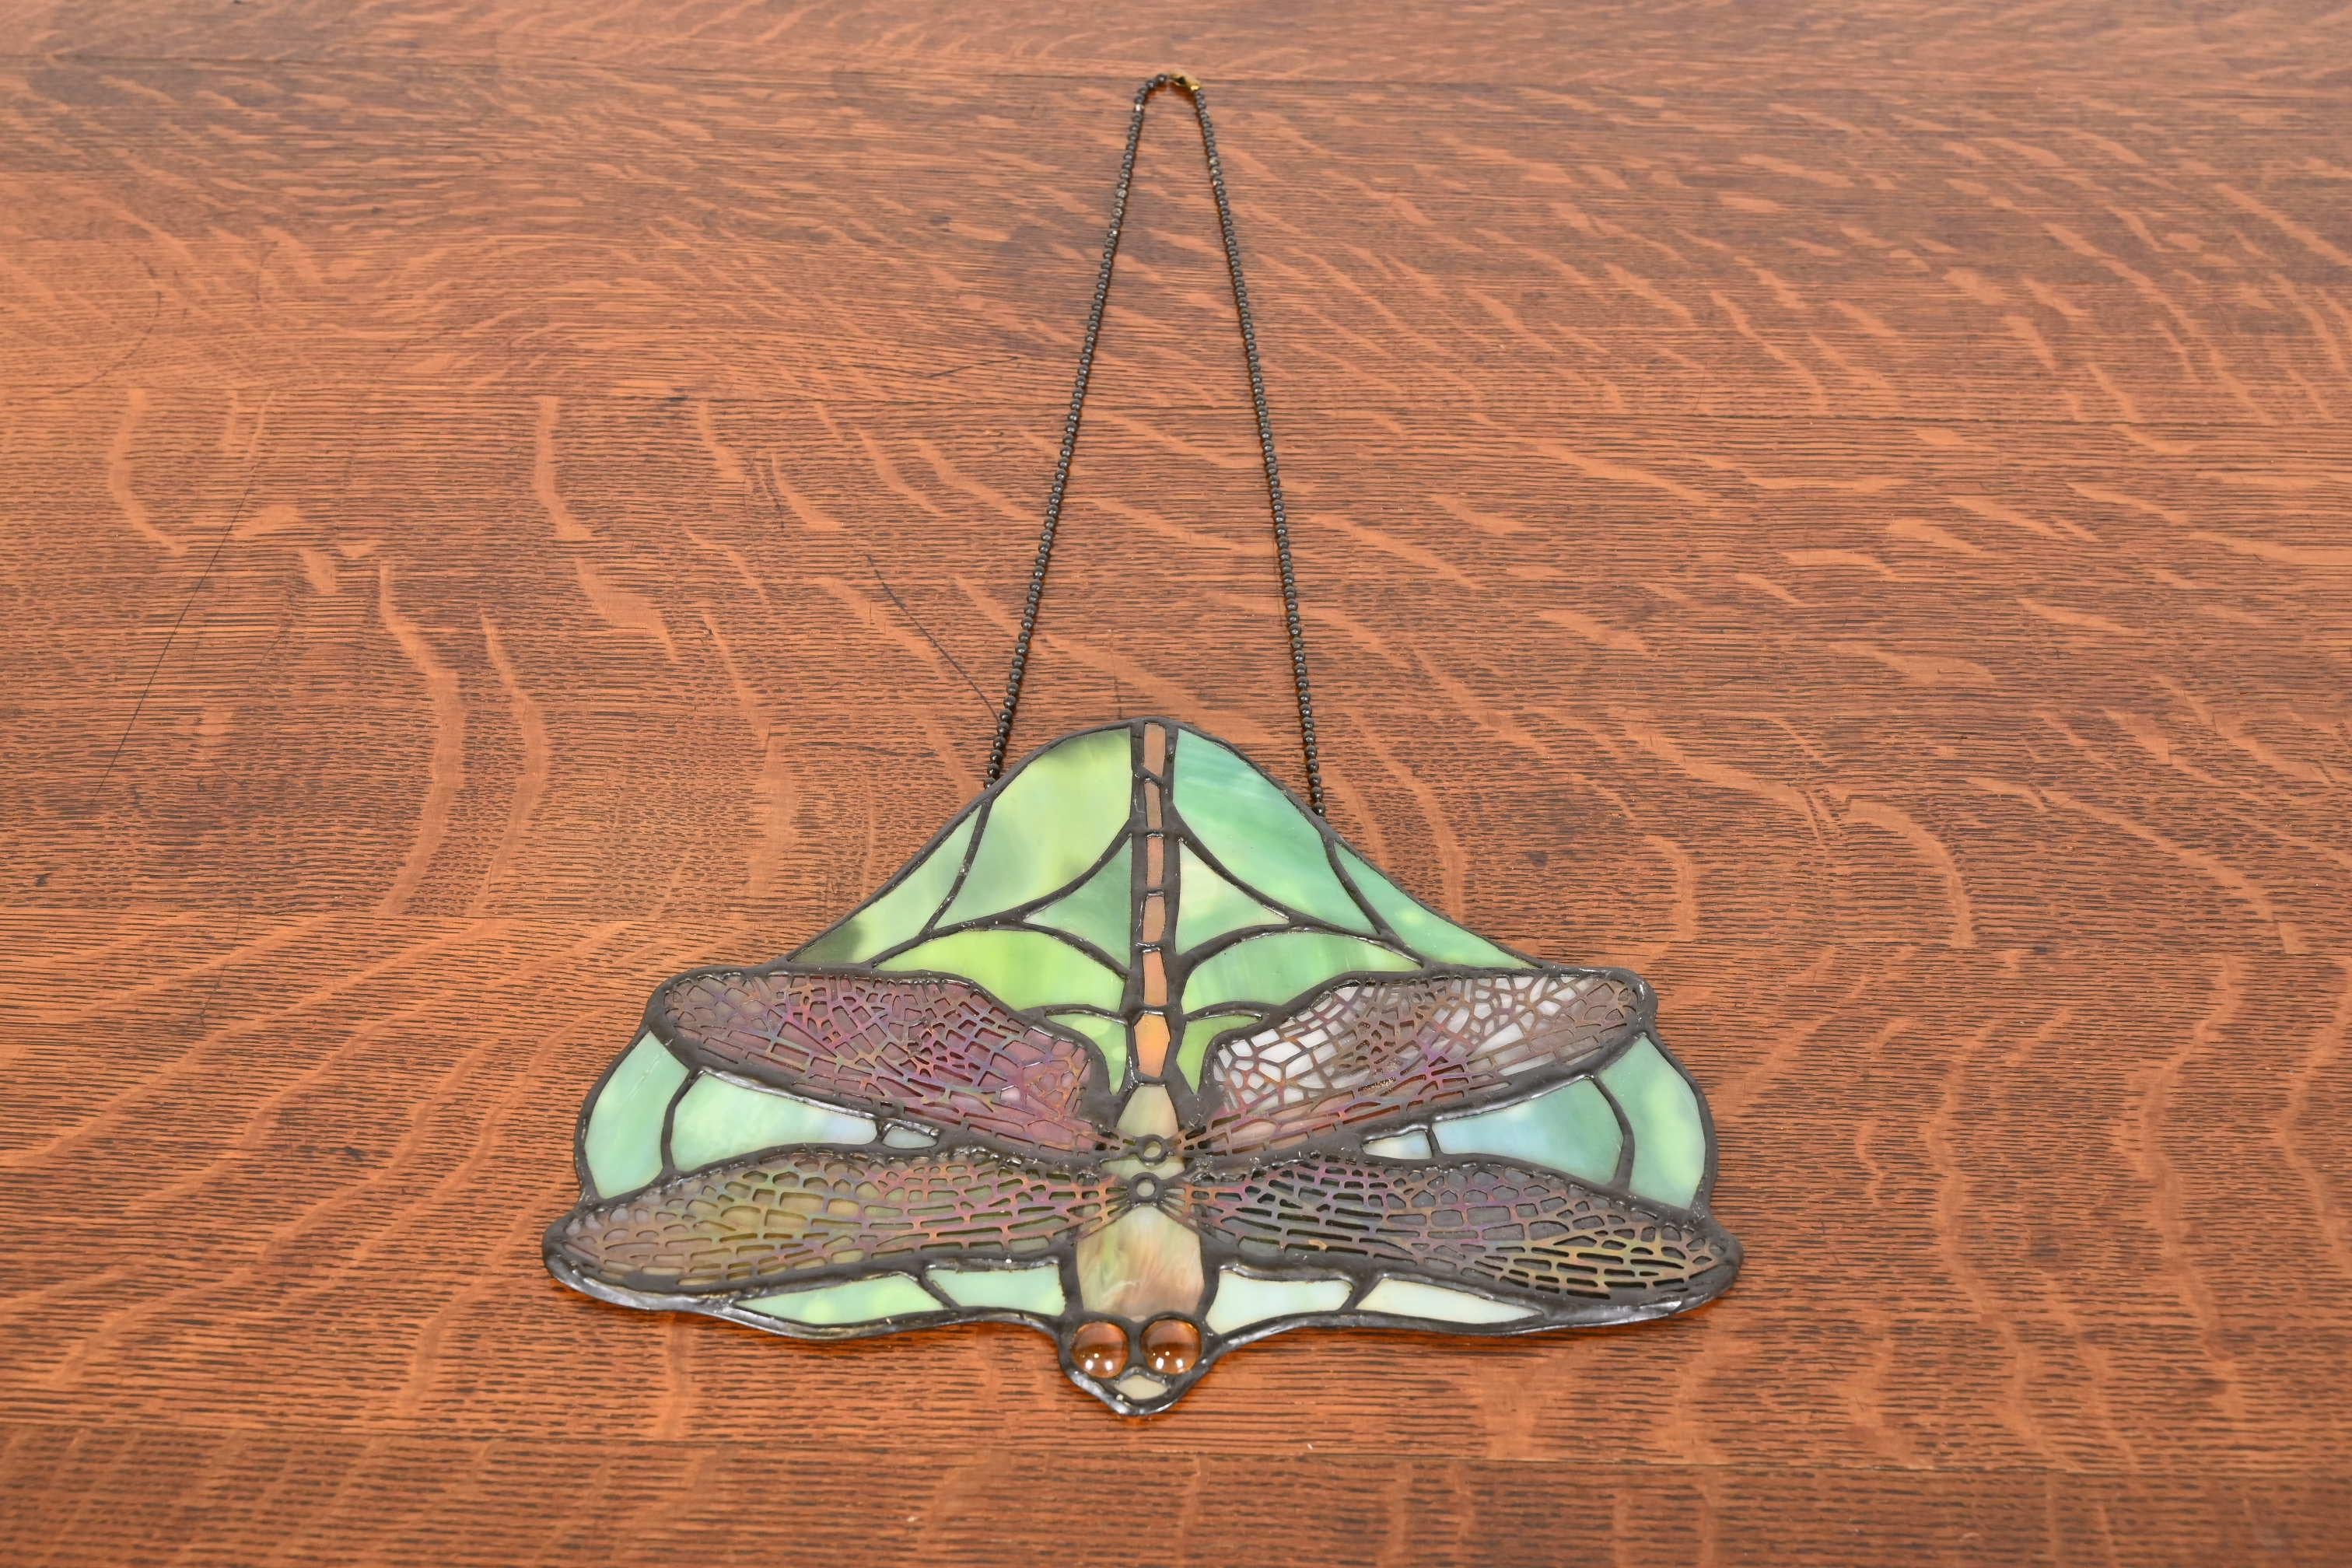 Arts & Crafts Dragonfly Stained Glass Lamp Screen Pendant After Tiffany Studios In Good Condition For Sale In South Bend, IN